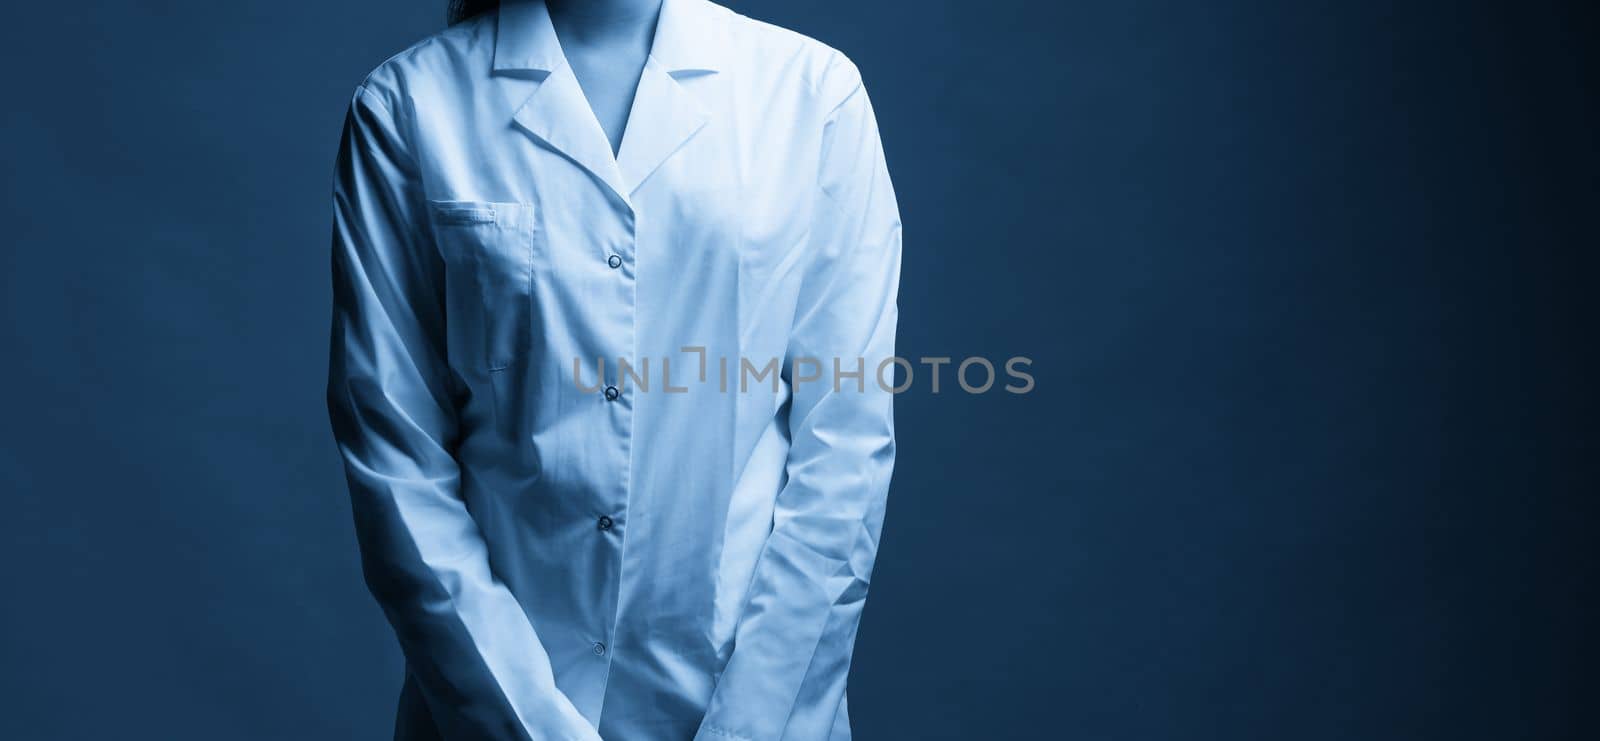 Young doctor with stethoscope against black background, studio shot with copy space by Mariakray